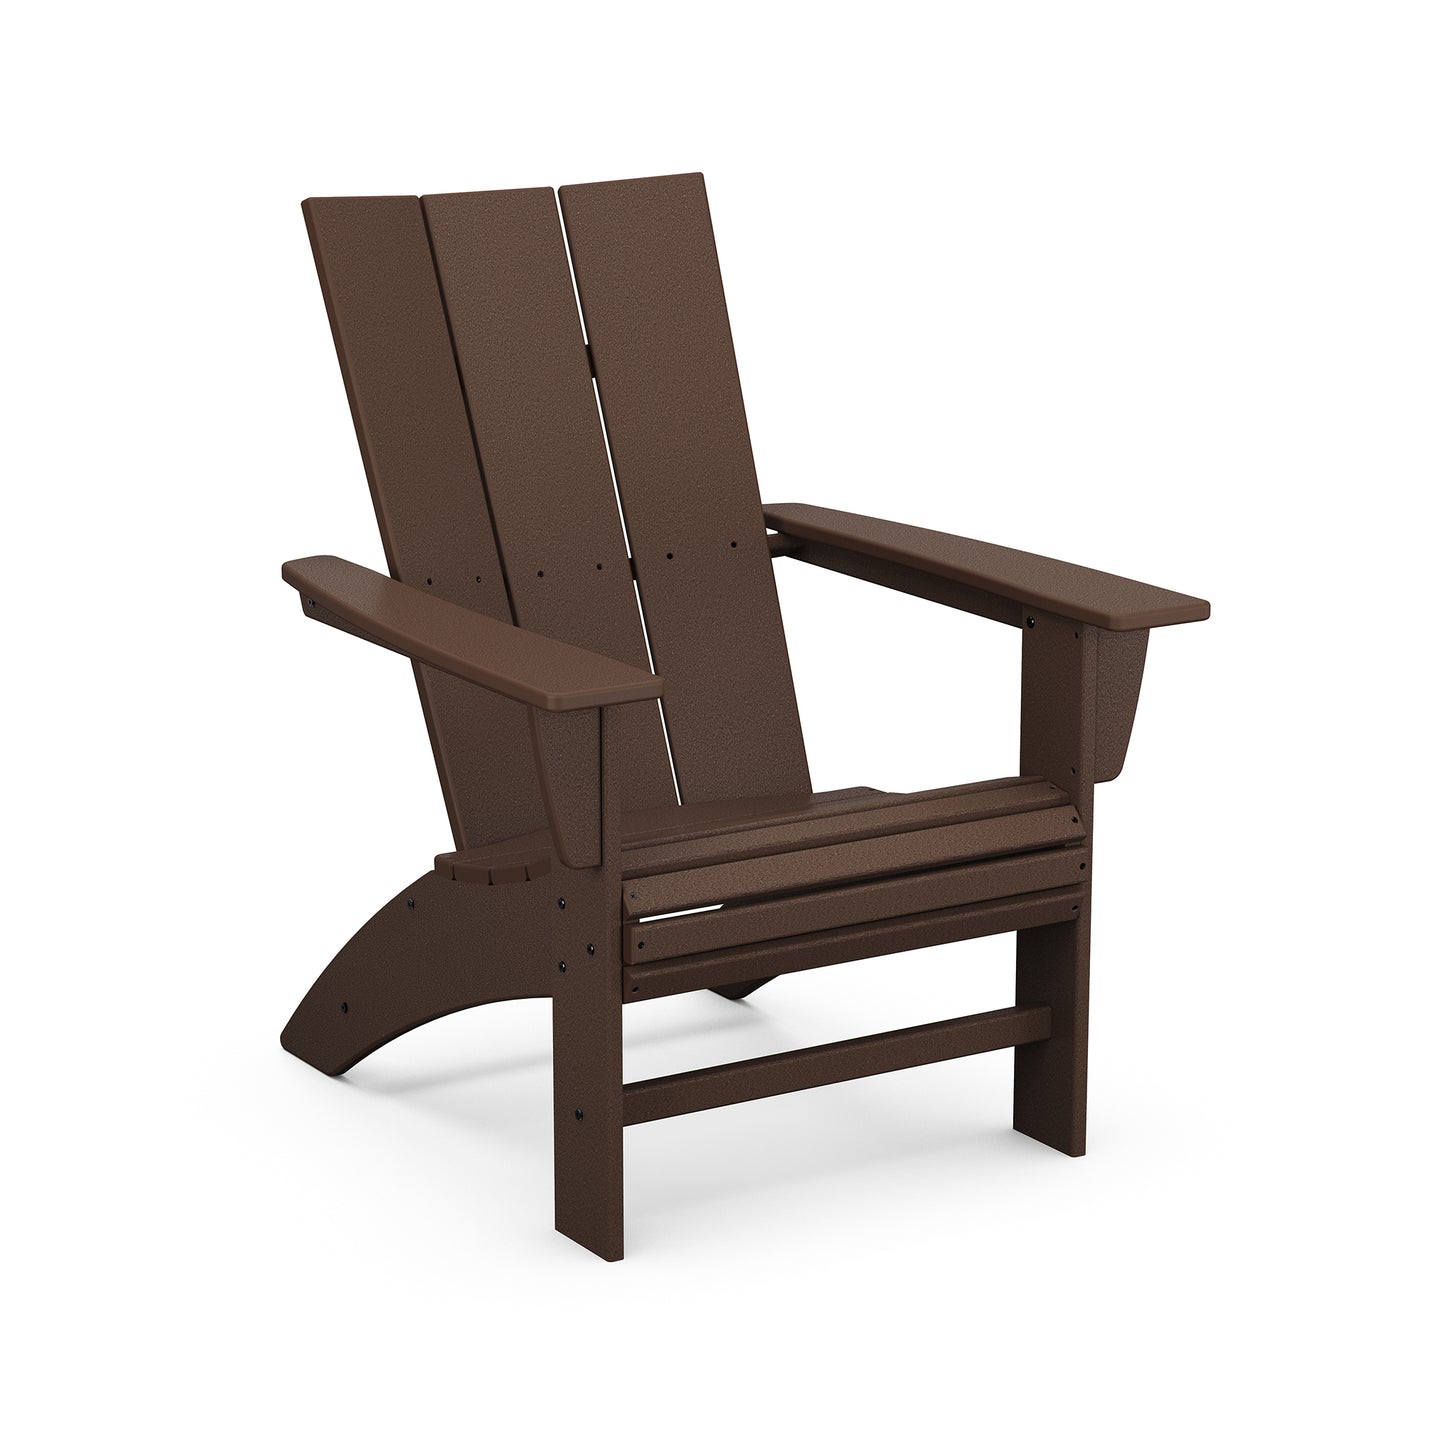 A brown POLYWOOD Modern Curveback Adirondack chair made of synthetic planks, featuring a slanted back and wide armrests, displayed on a plain white background.